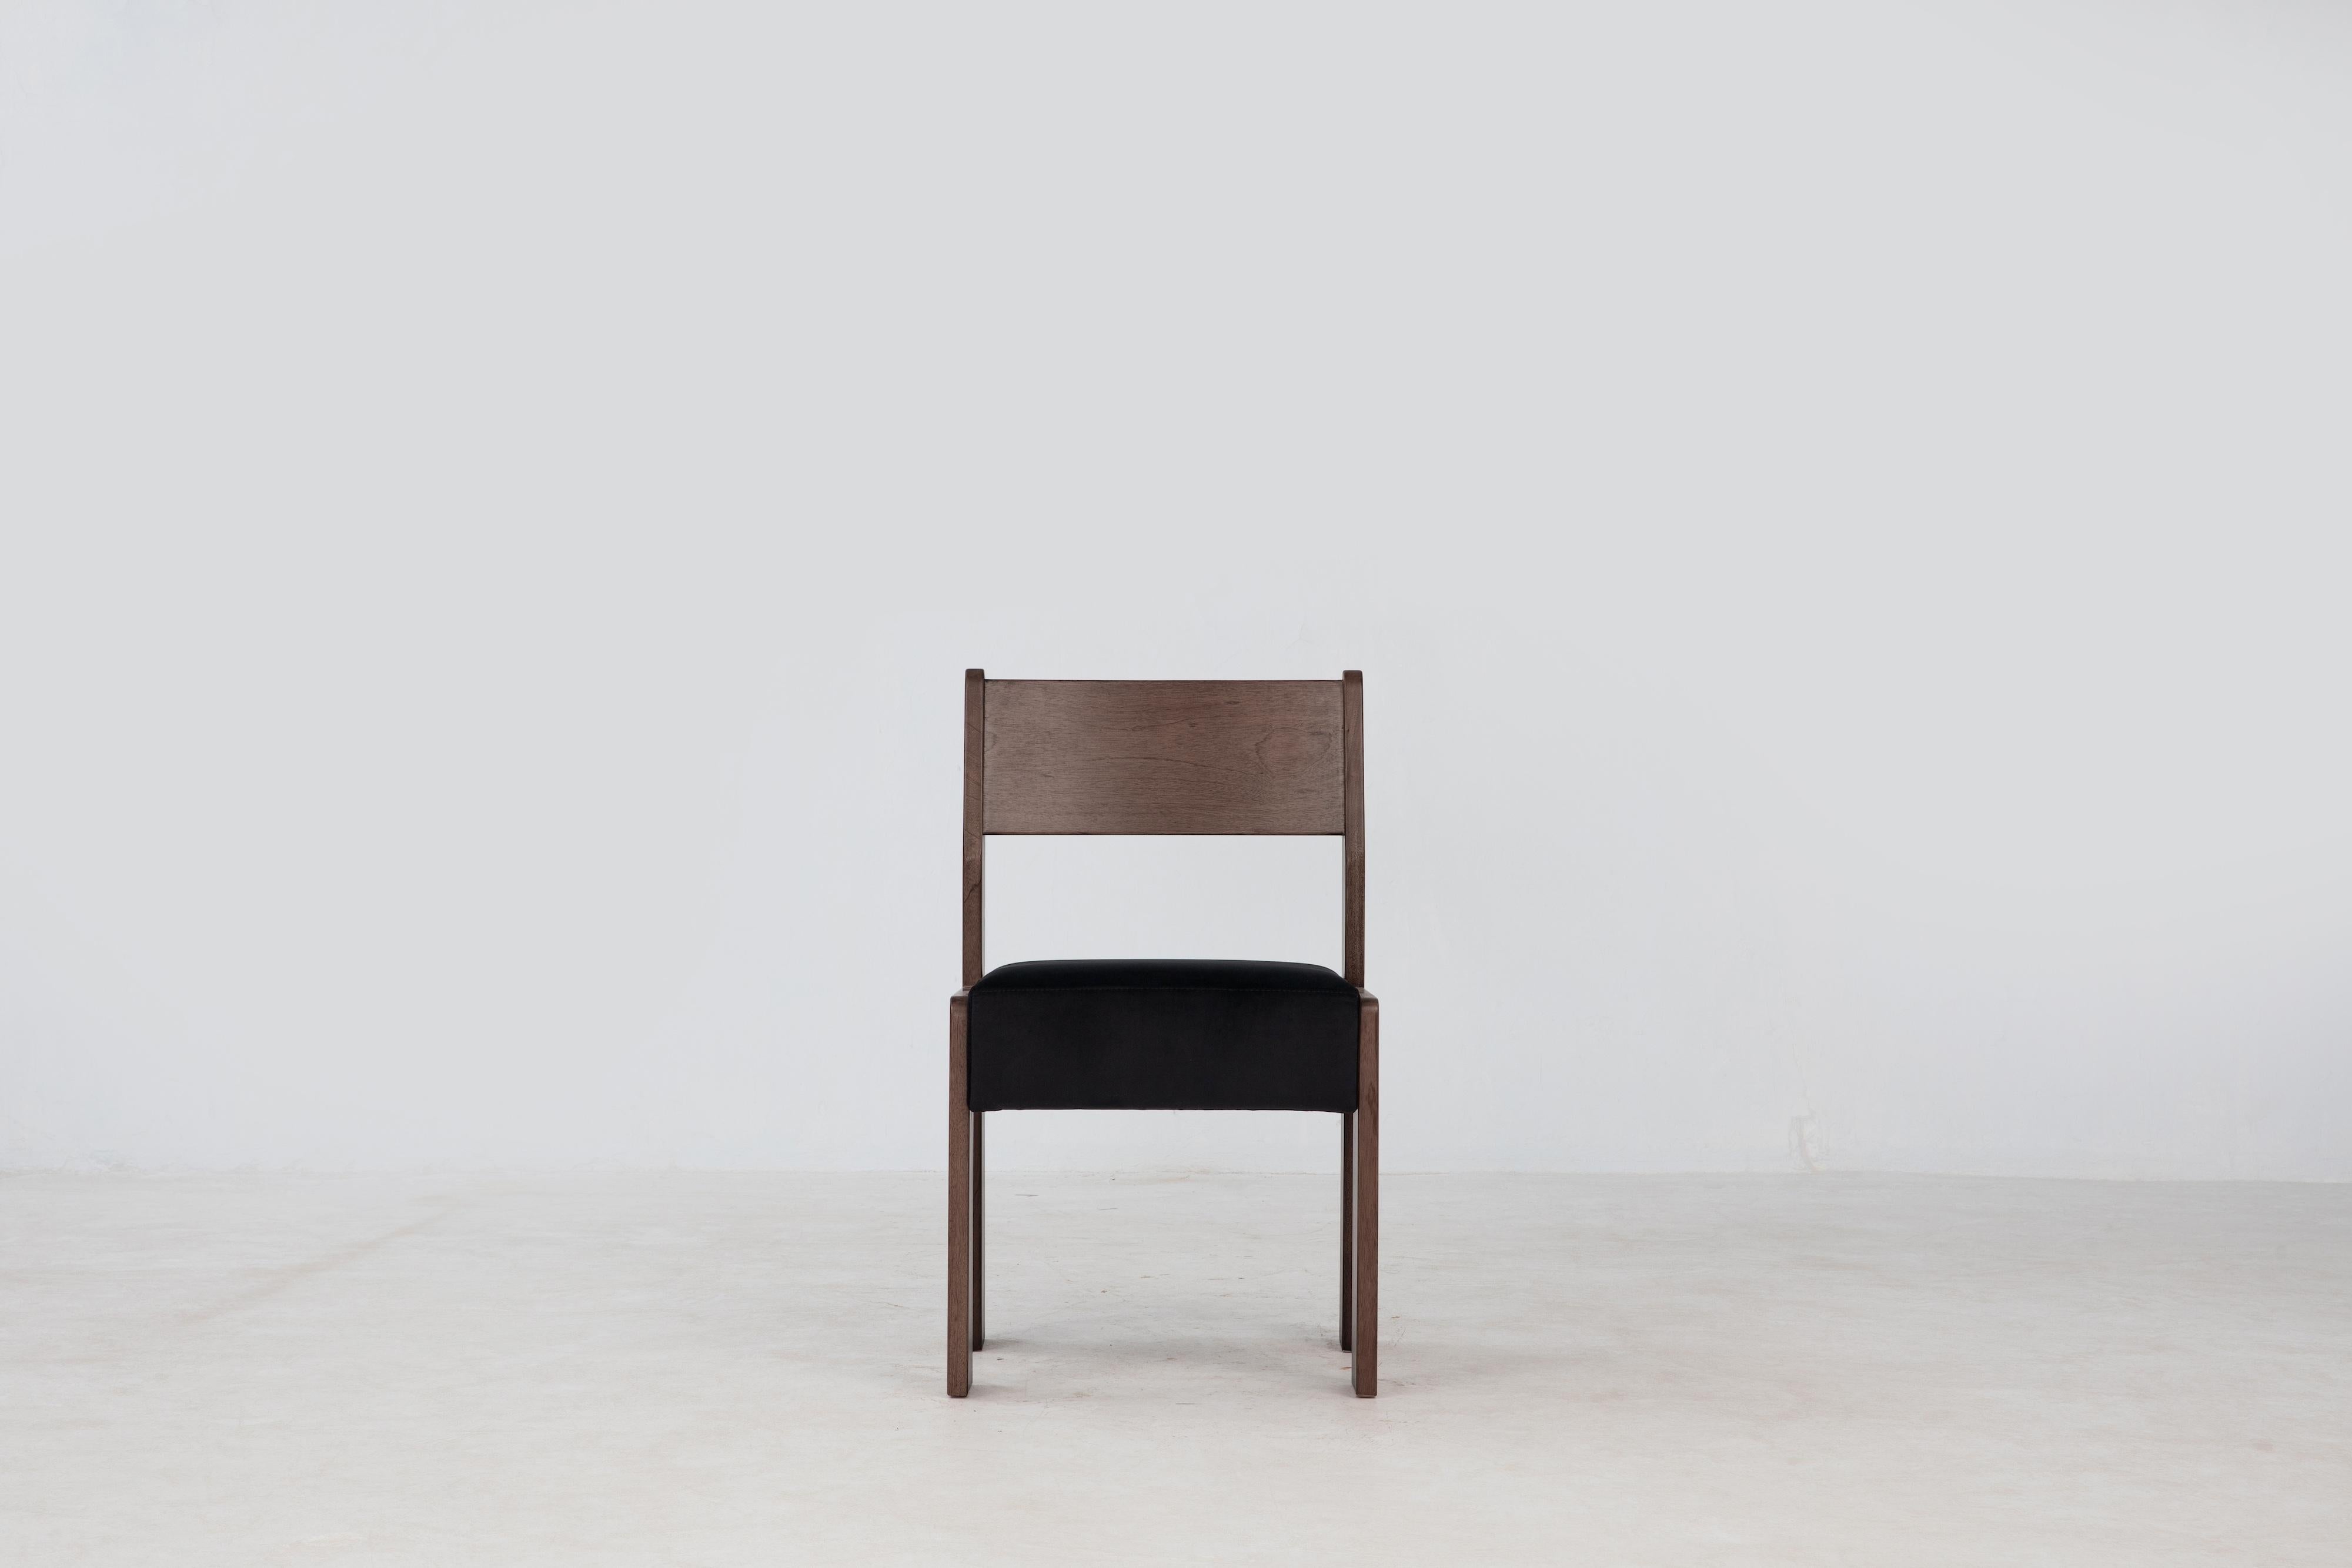 The Reka Side Chair spotlights contrasting width. In designing the chair, we played with wide and narrow, thick and thin: the legs are wide and flat along one axis, thin along the other, while the seat cushion was elongated and fattened vertically.